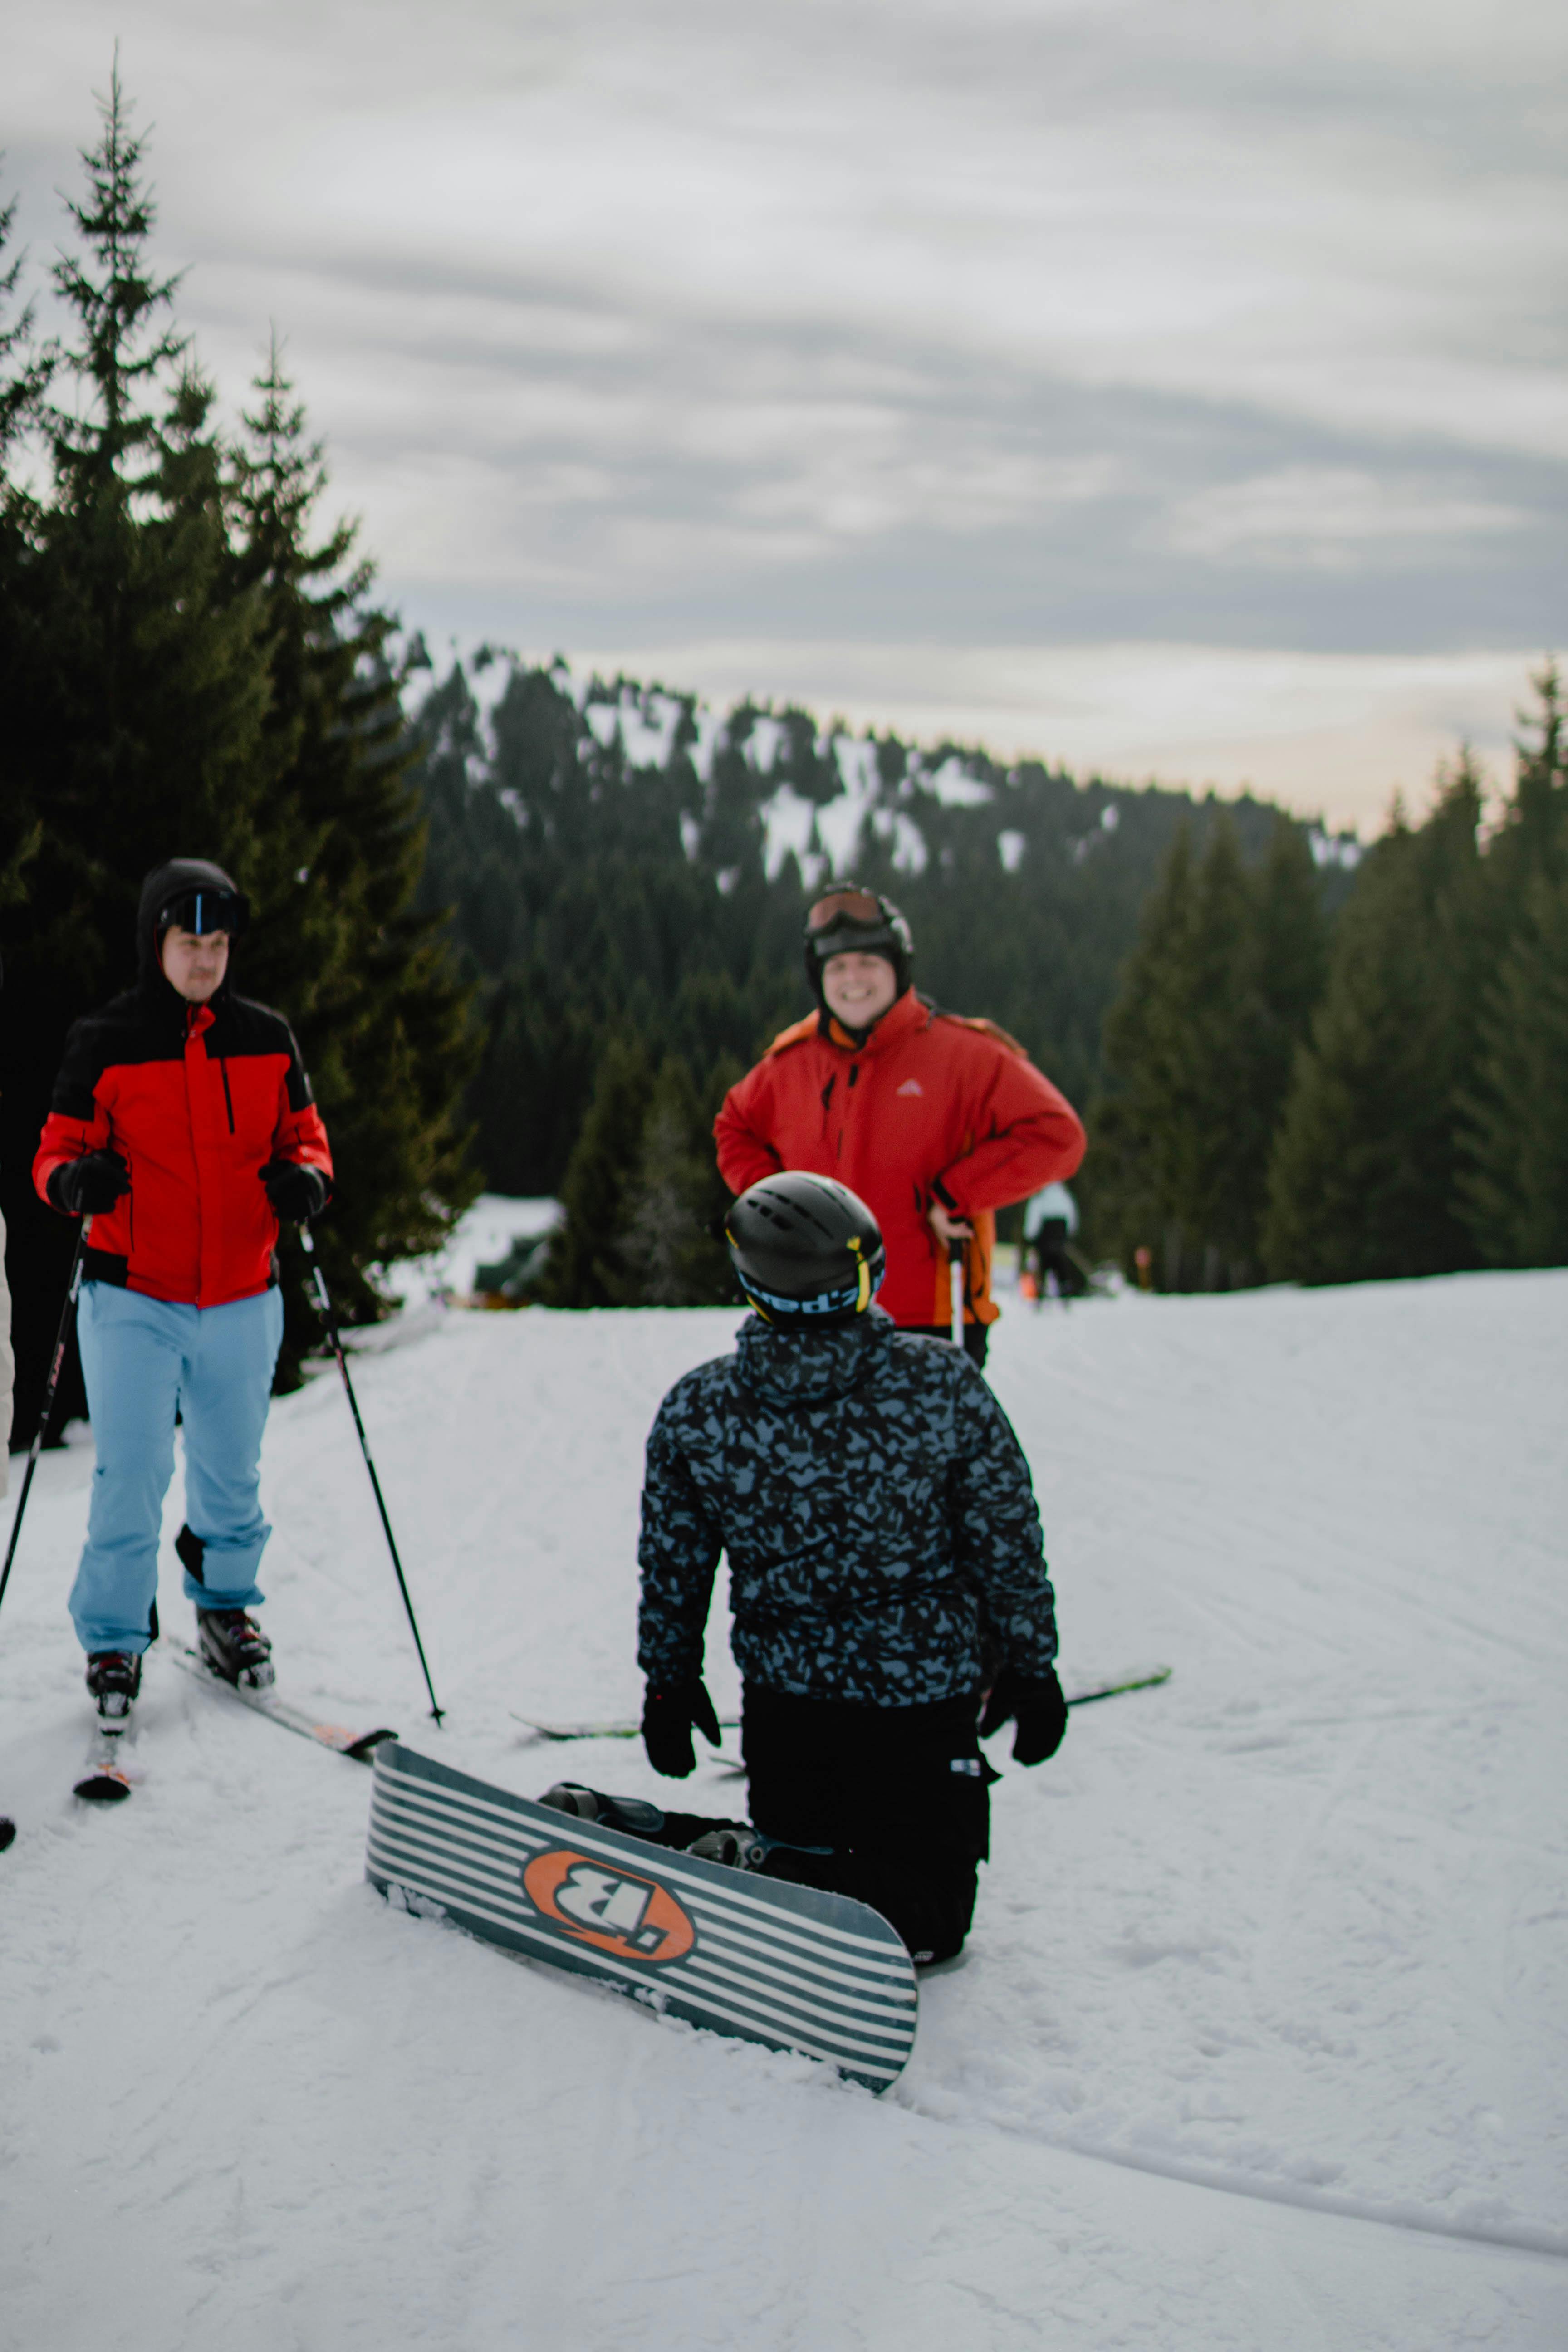 friends spending time together with skis and snowboard in winter